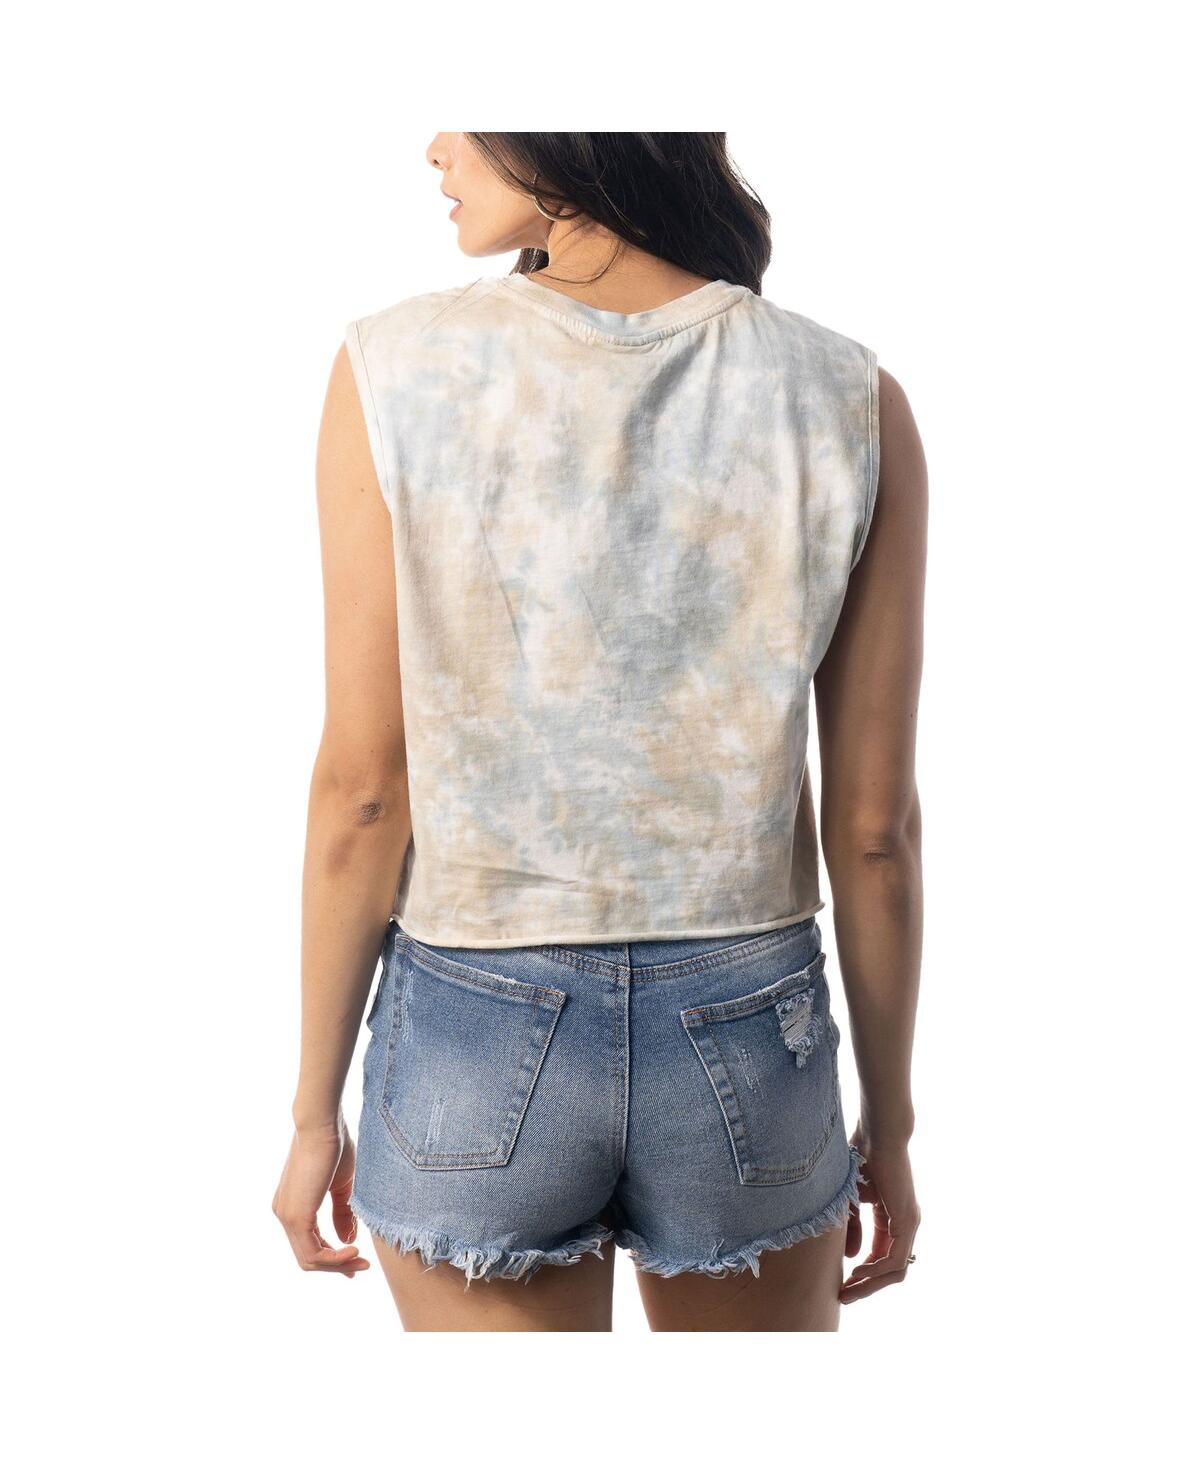 Shop The Wild Collective Women's  White San Diego Padres Washed Muscle Tank Top